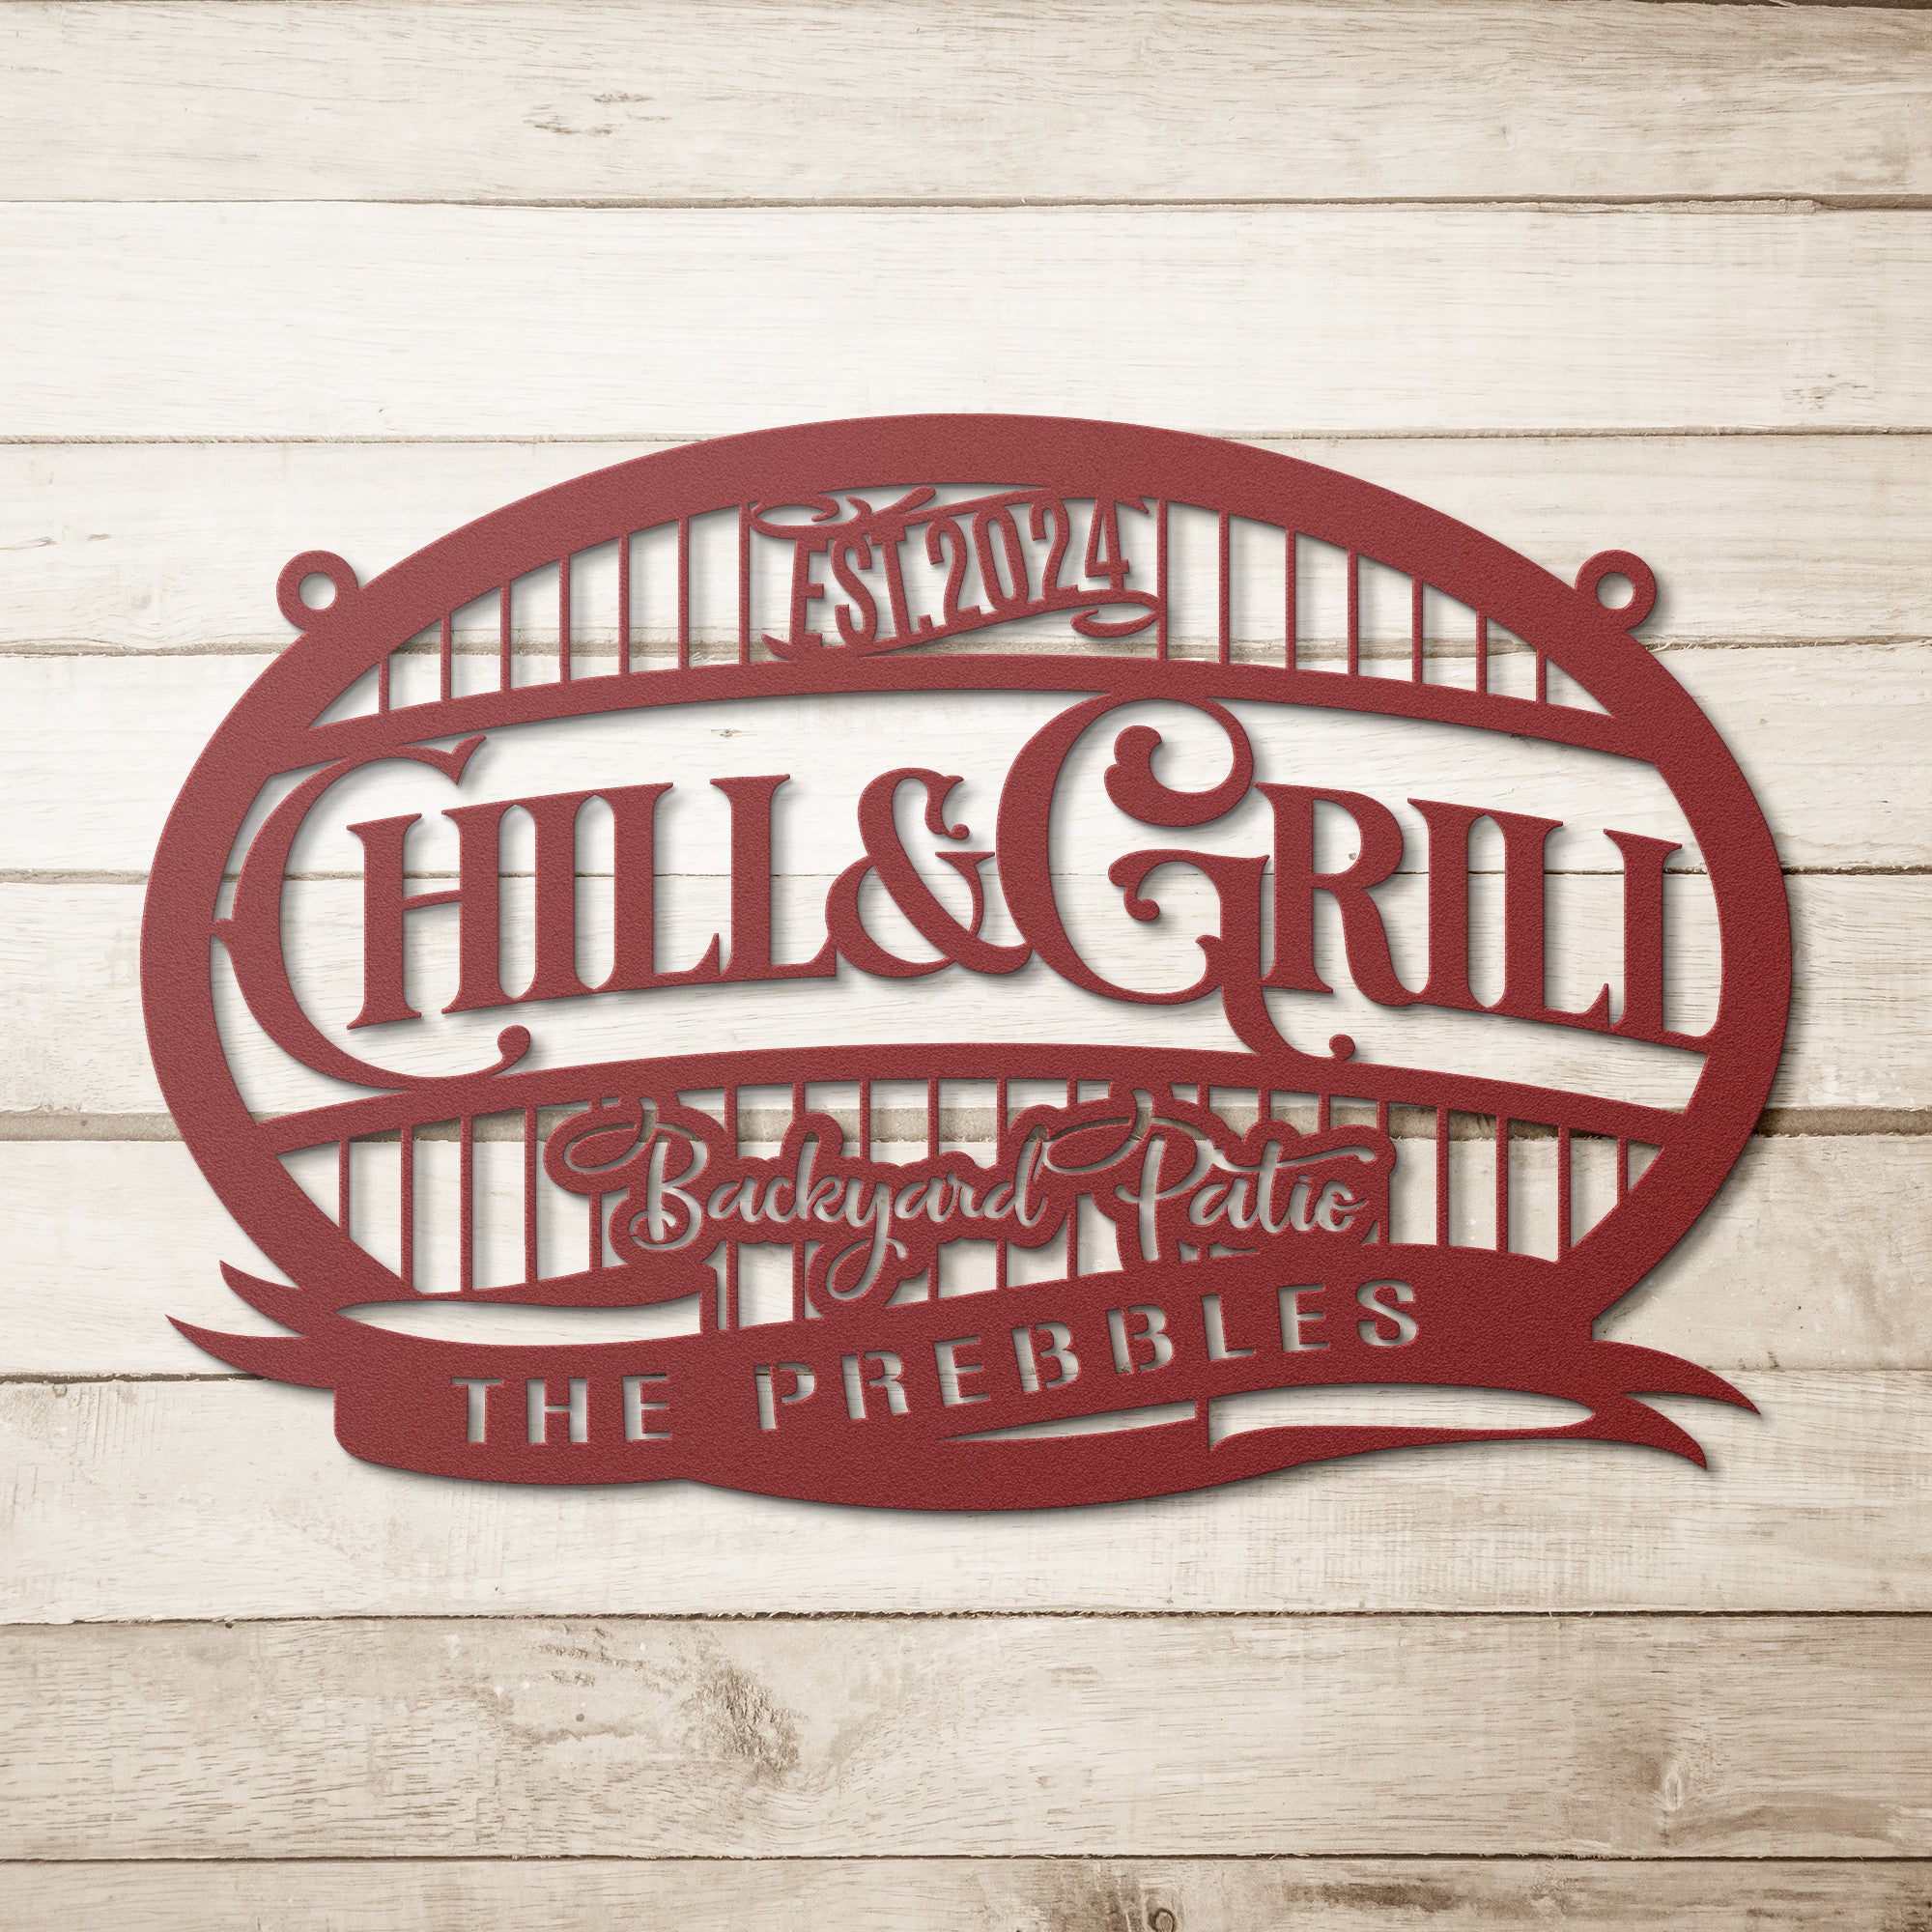 Chill and Grill